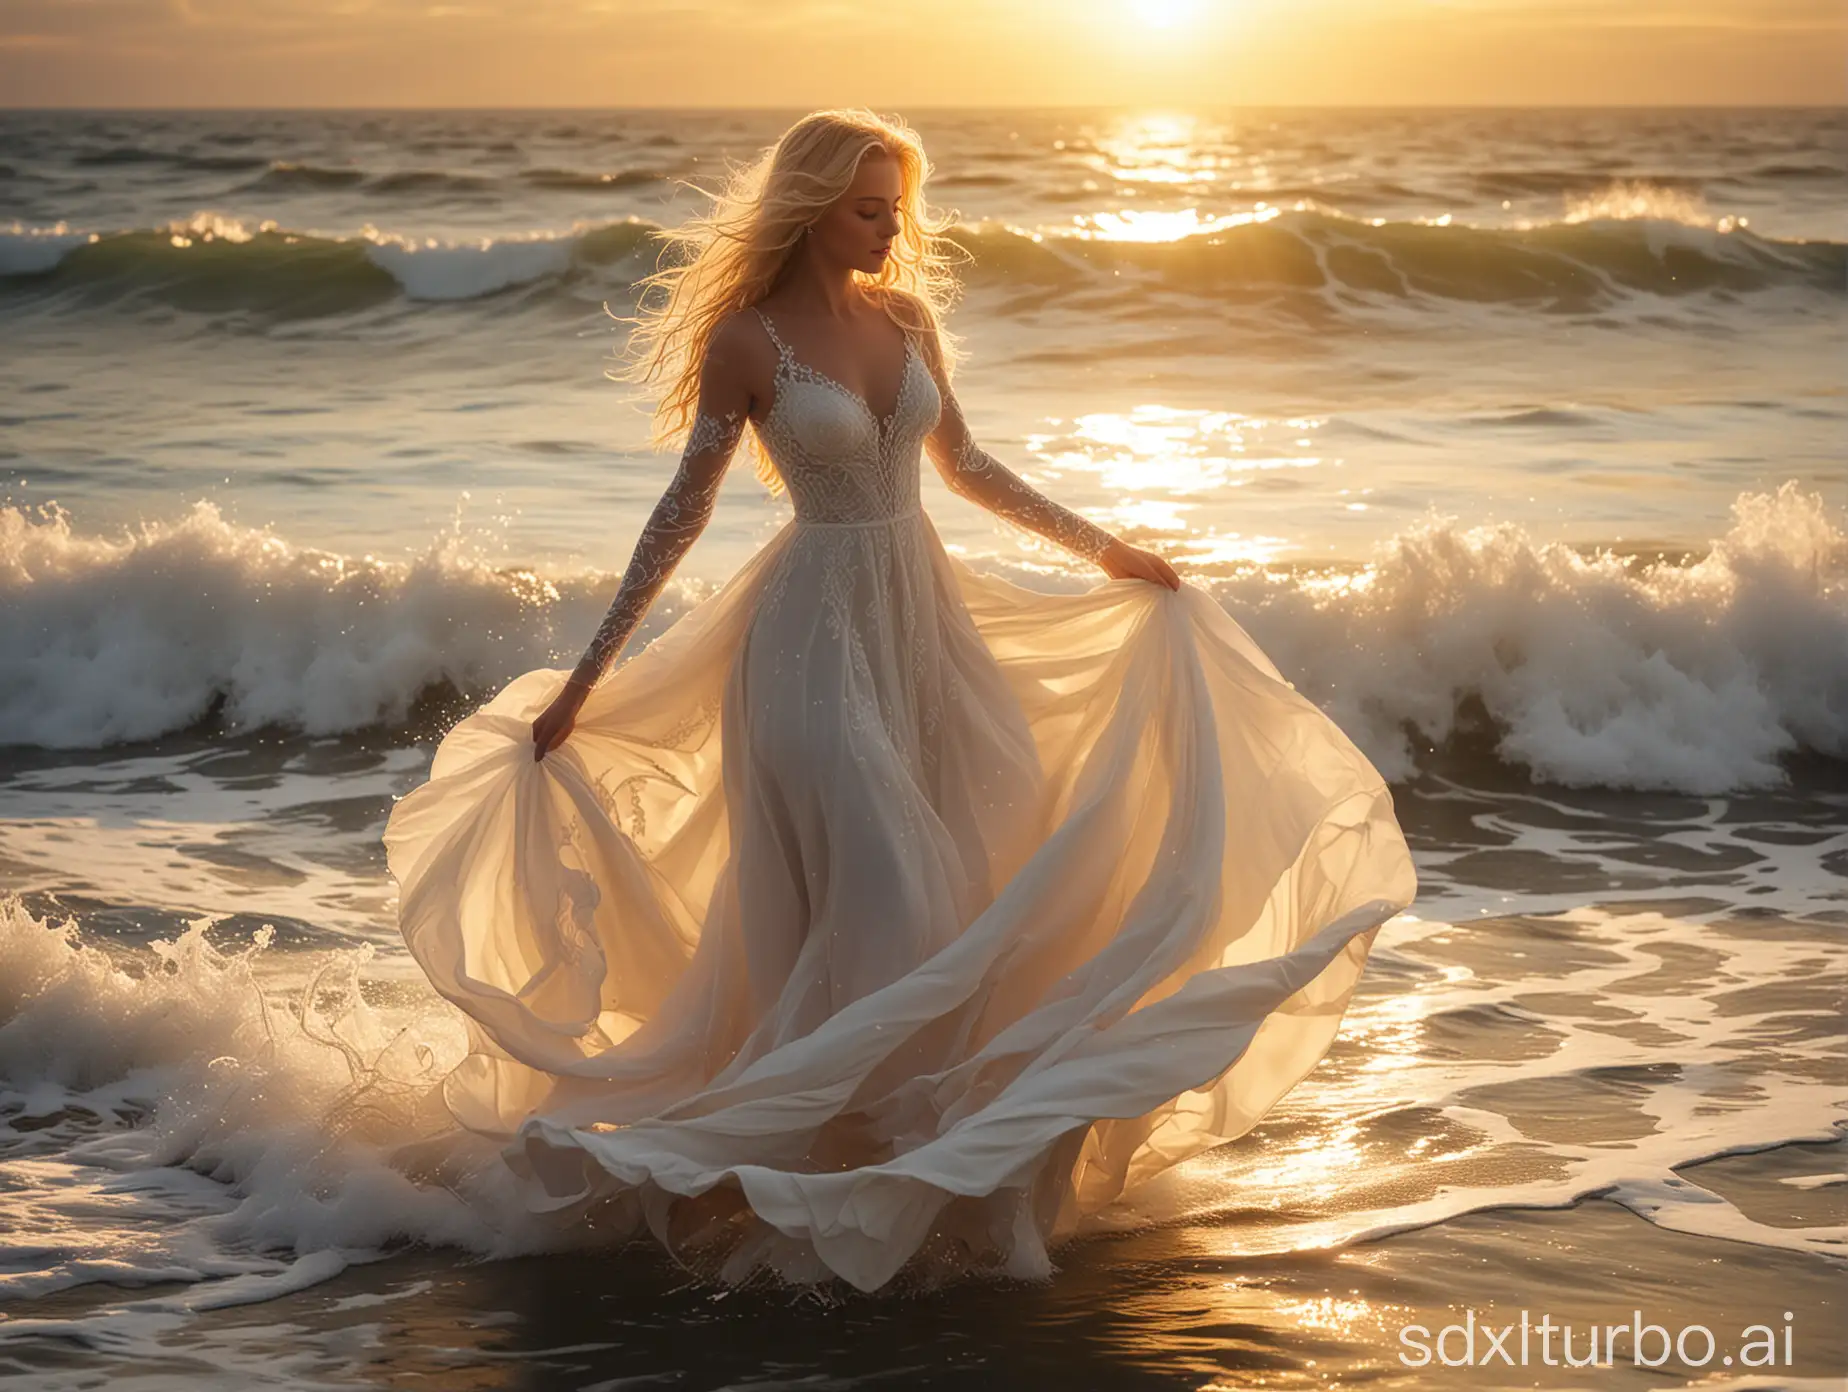 Ethereal-Woman-in-Radiant-White-Gown-Twirling-by-Tranquil-Sea